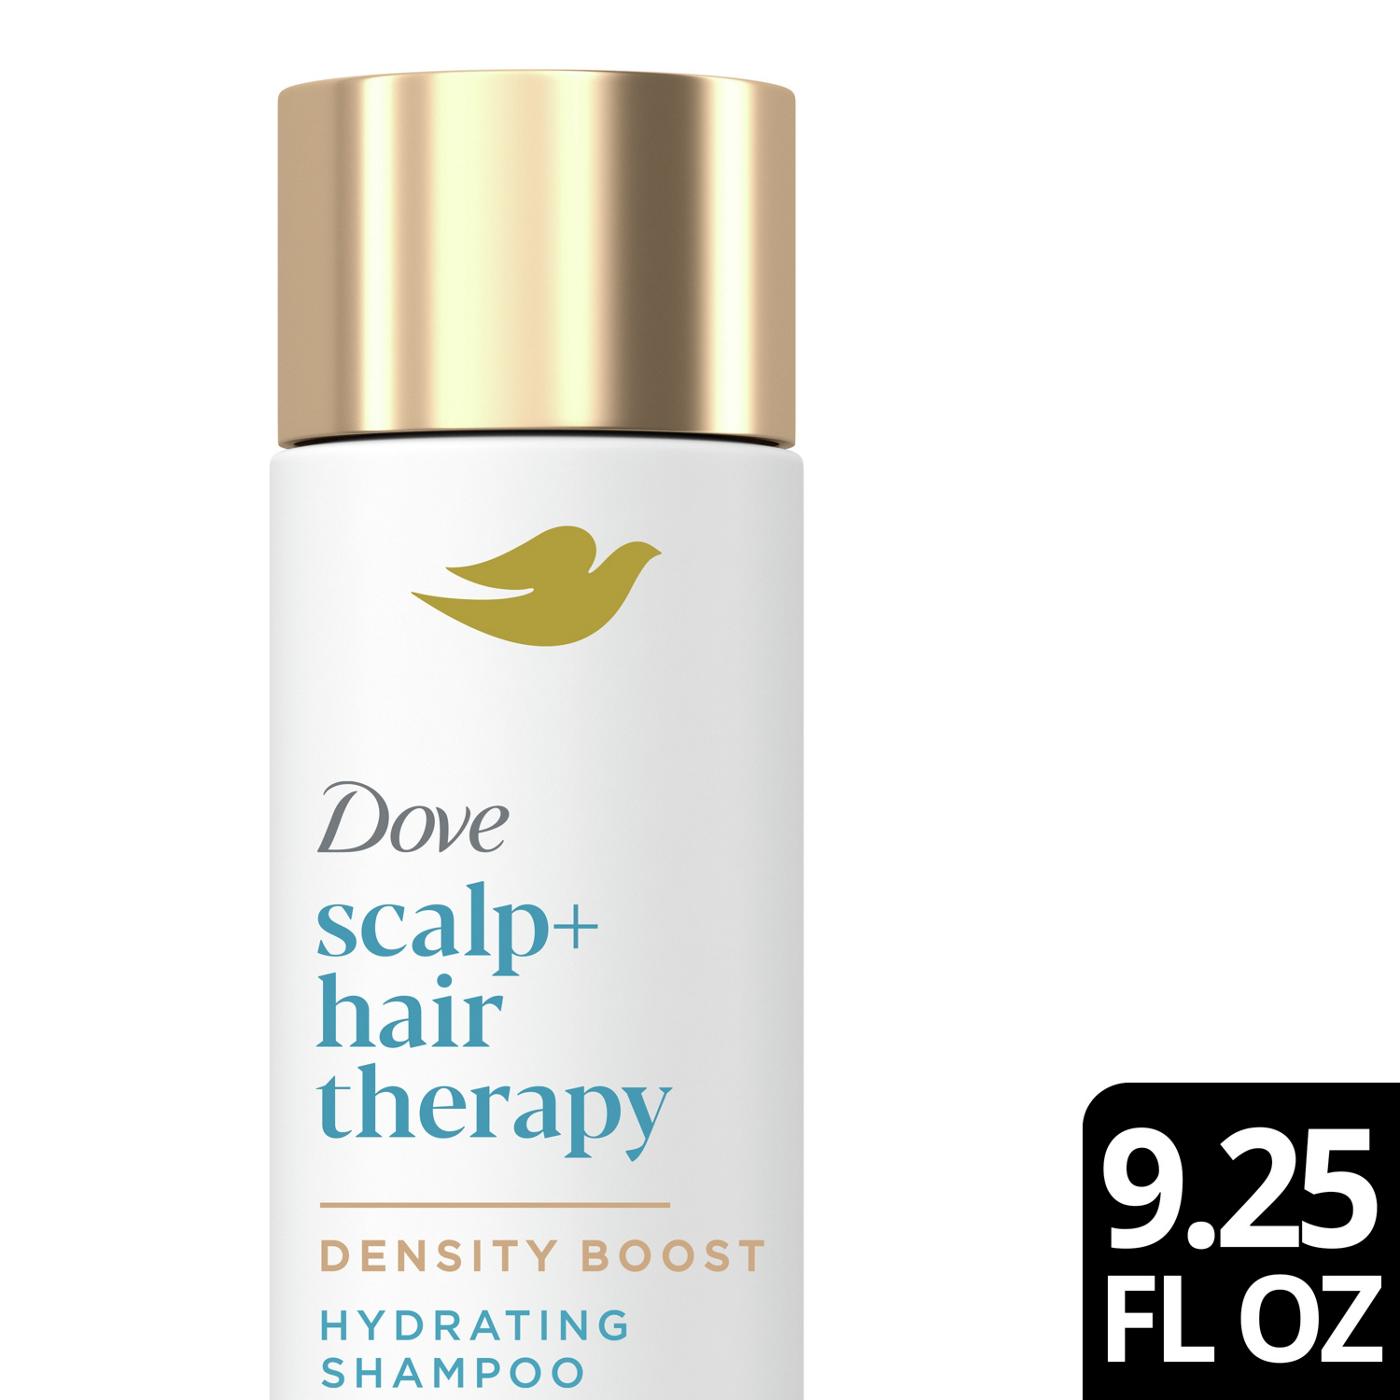 Dove Scalp+ Hair Therapy Hydrating Shampoo; image 2 of 4